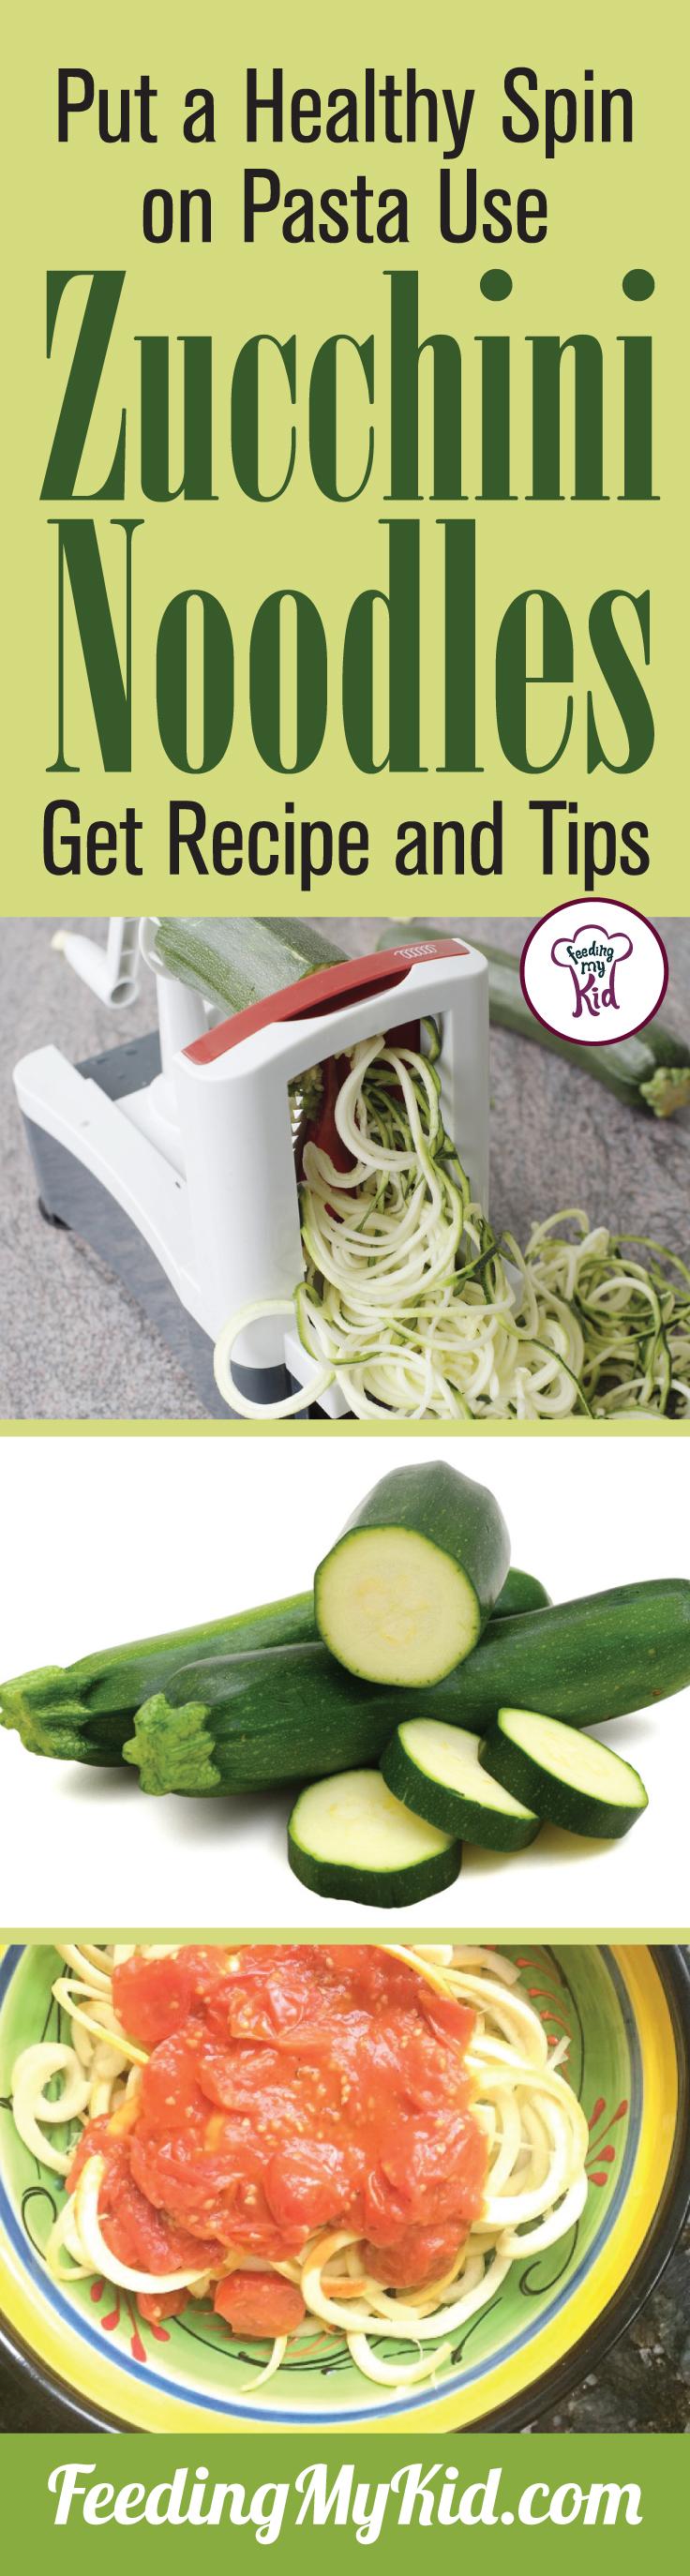 Spiralizing zucchini to make “zoodles” is a great way to introduce zucchini to your kids in an unexpected way. Try this great zucchini noodle recipe!